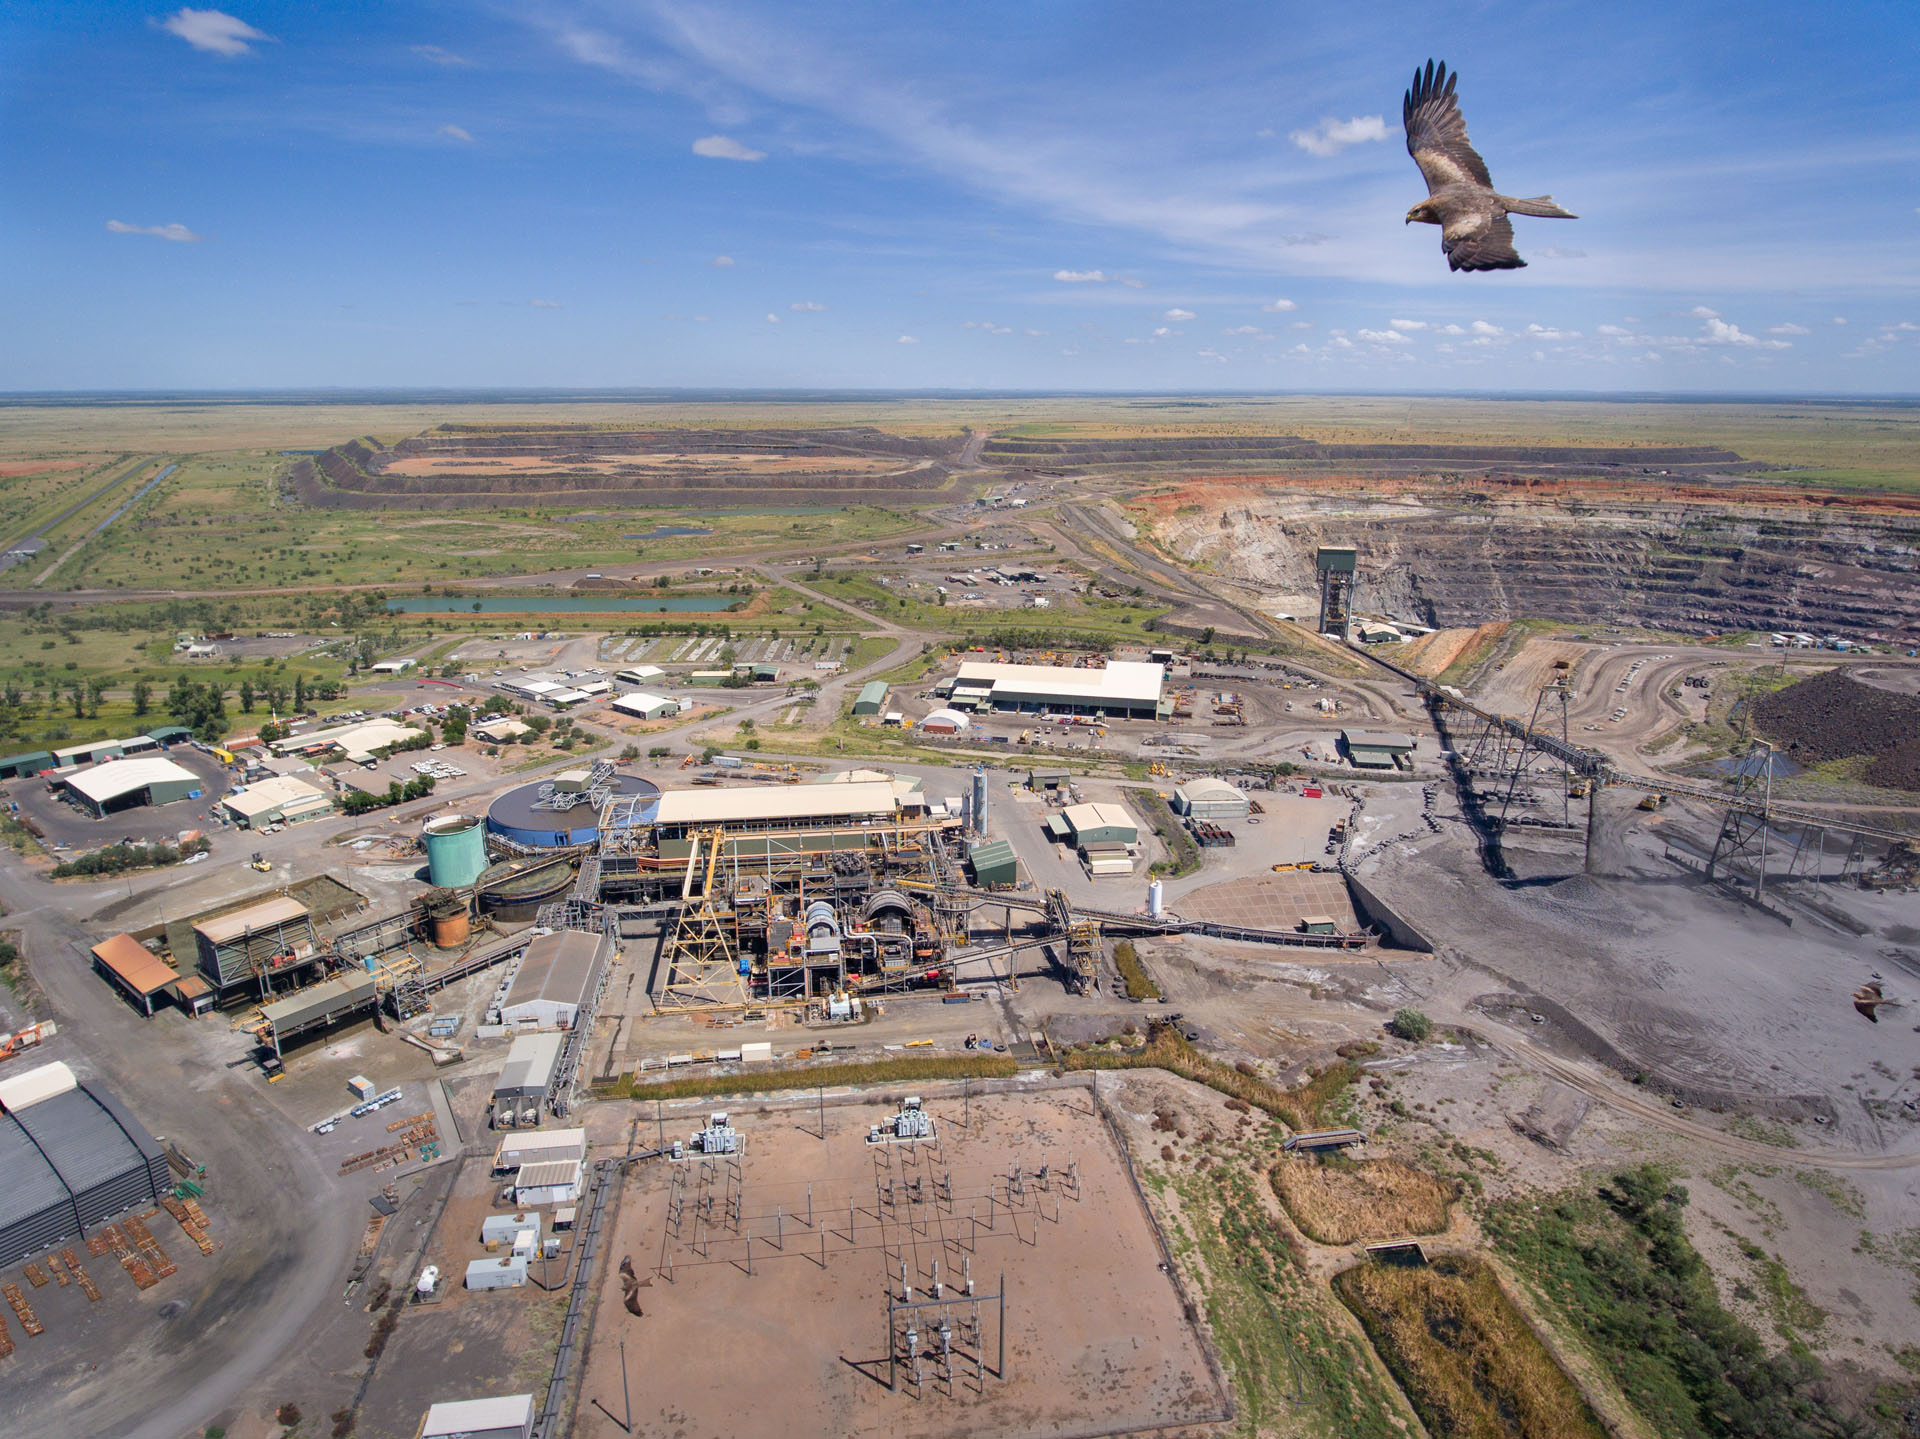 Photography of product, premises and personnel at Glencore's Ernest Henry Mine, Cloncurry